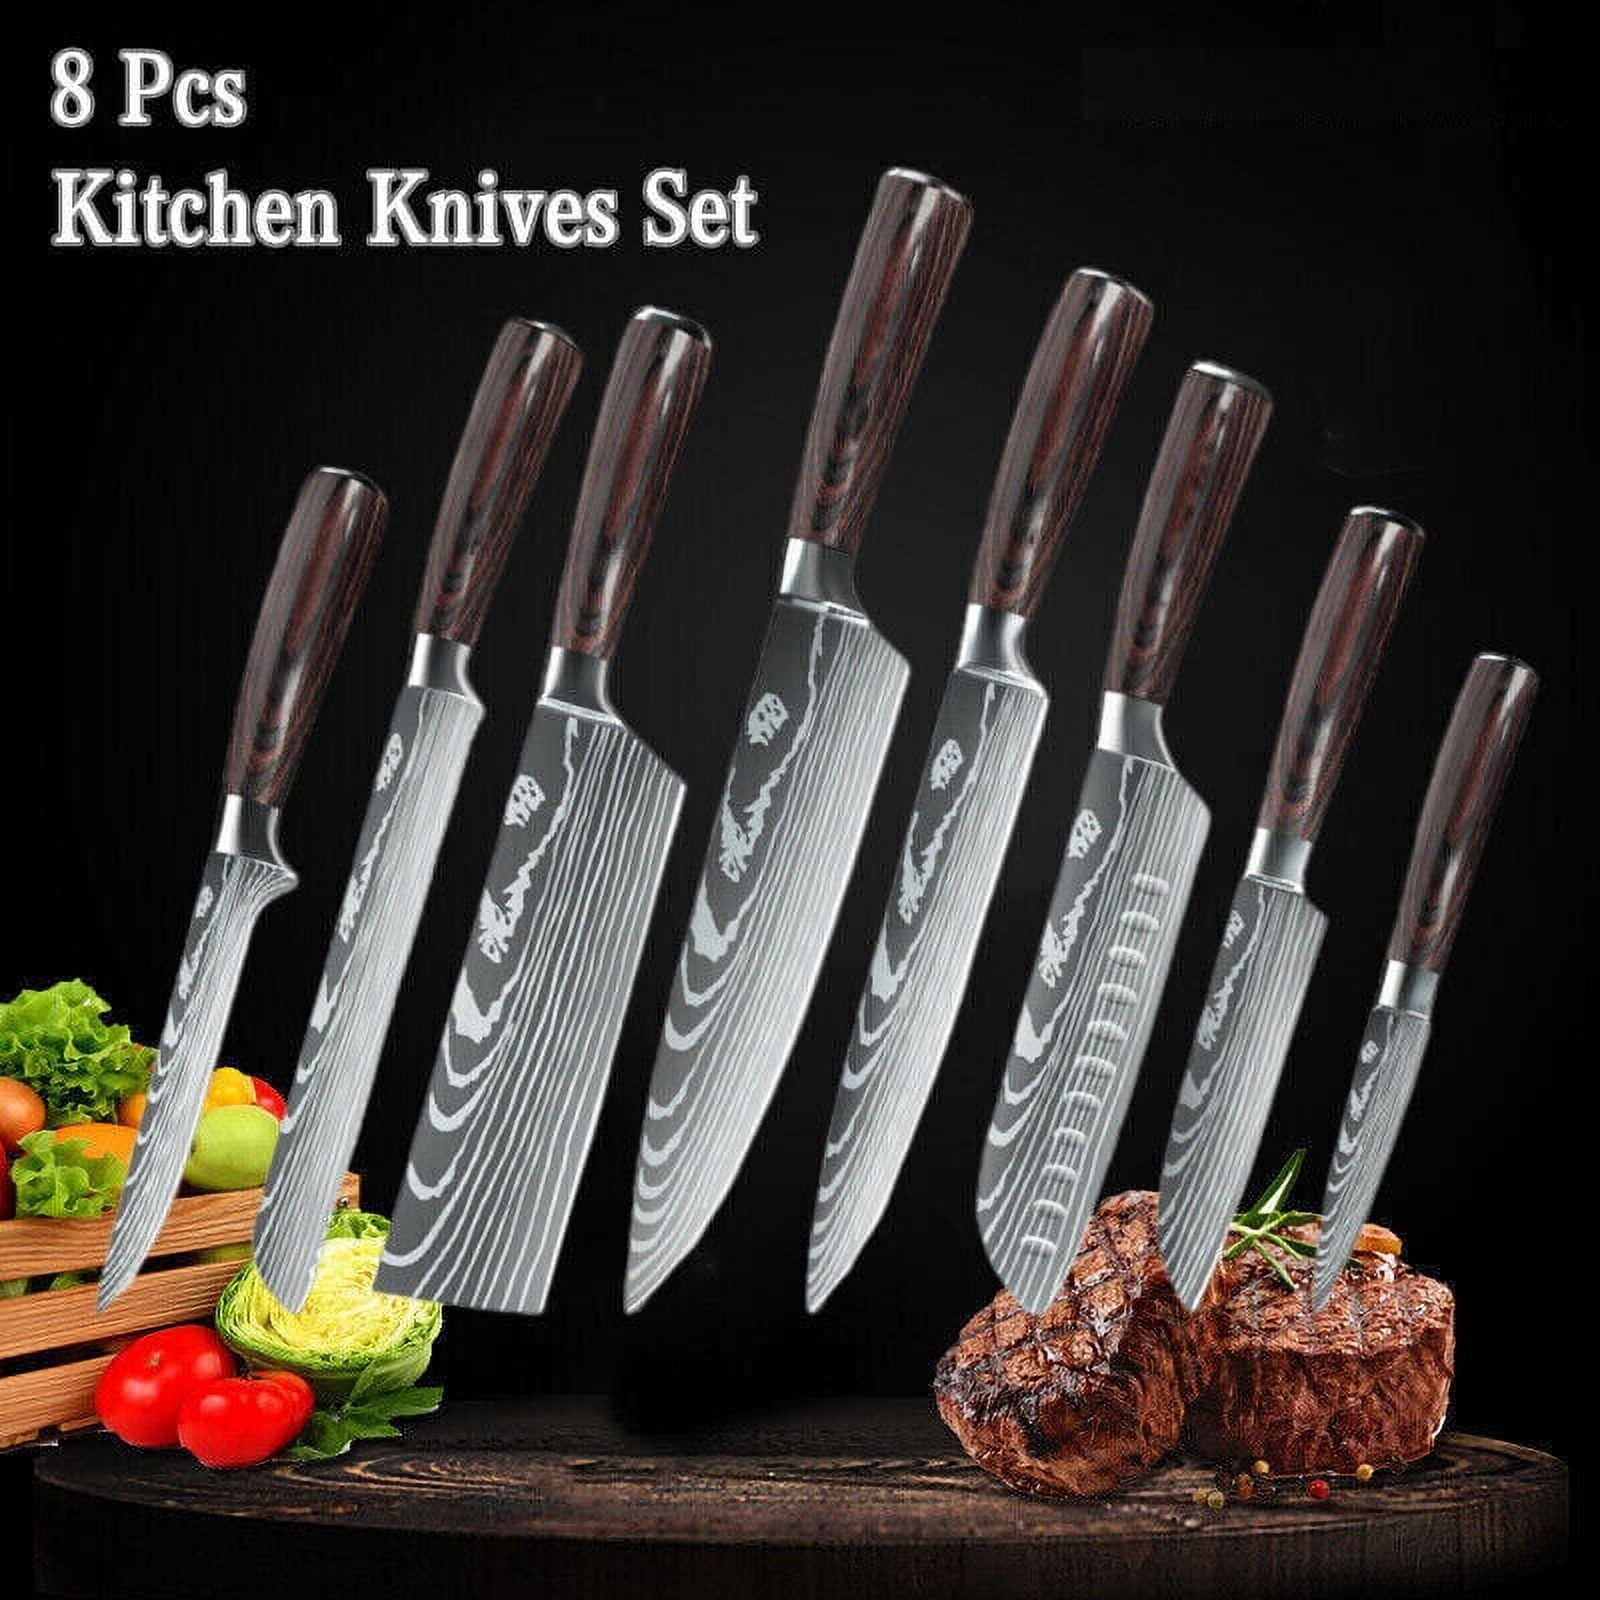  8-Piece Kitchen Knife Set With Rotary Stand, Sharpener,  Scissors, Stainless Steel Knife Sets with Hollow Horseshoe Handle,  Wear-Resistant and Durable (Red): Home & Kitchen